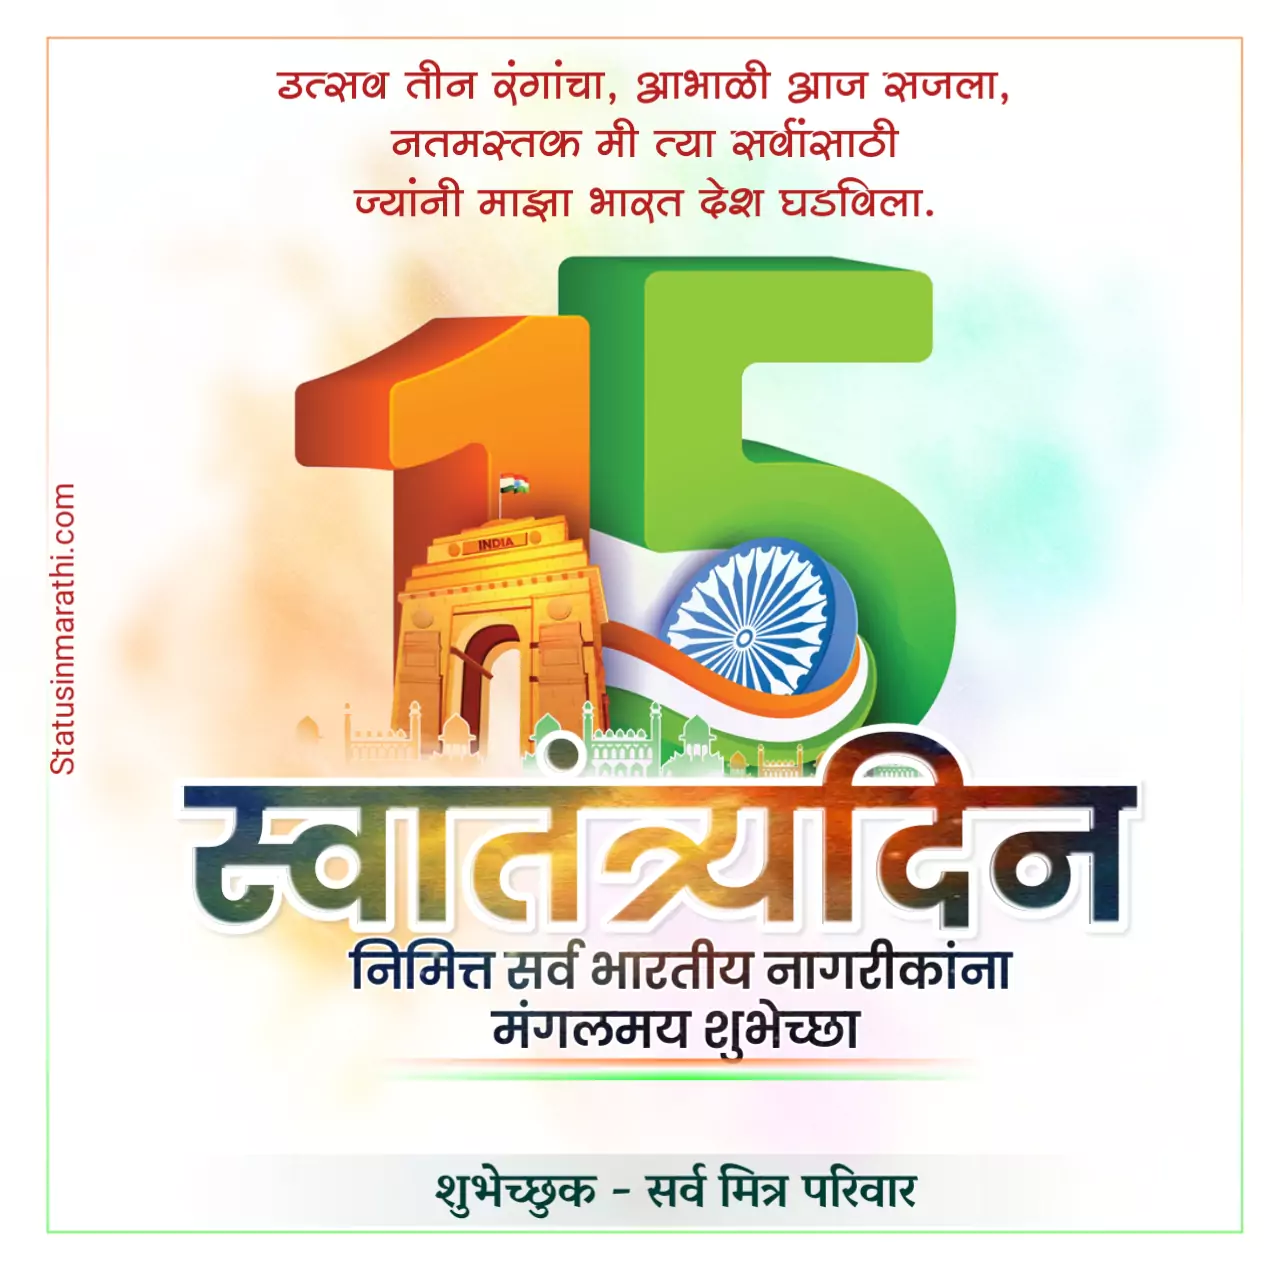 Happy Independence day wishes in marathi